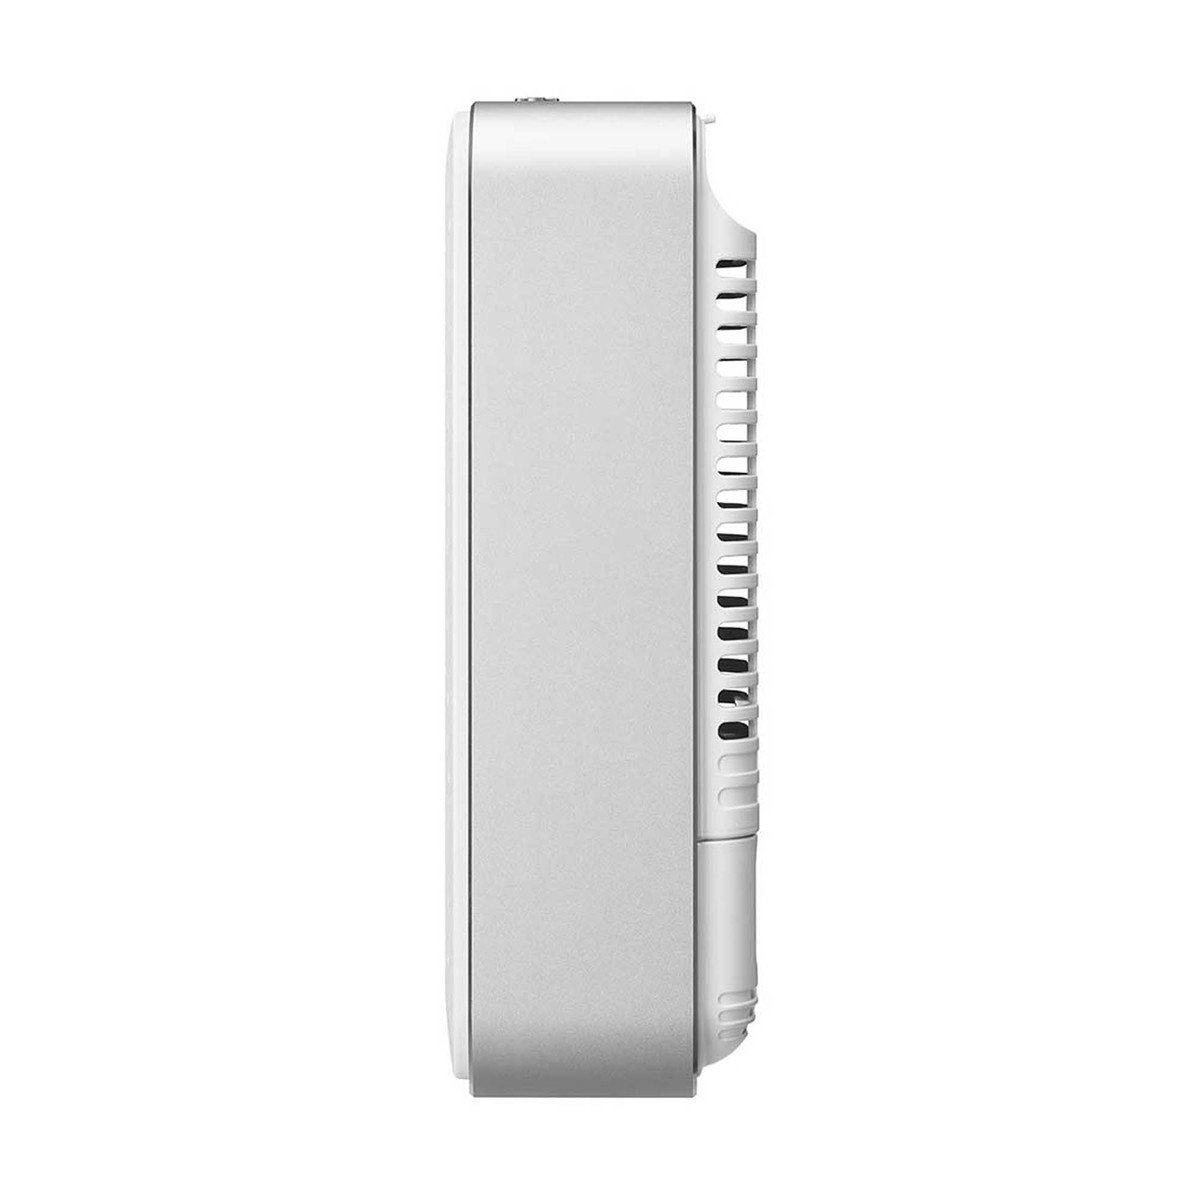 LG PuriCare Mini Air Purifier AP151MWA1, 4-stage Filtration System, 4-color Smart Display, Dual Inverter Motor